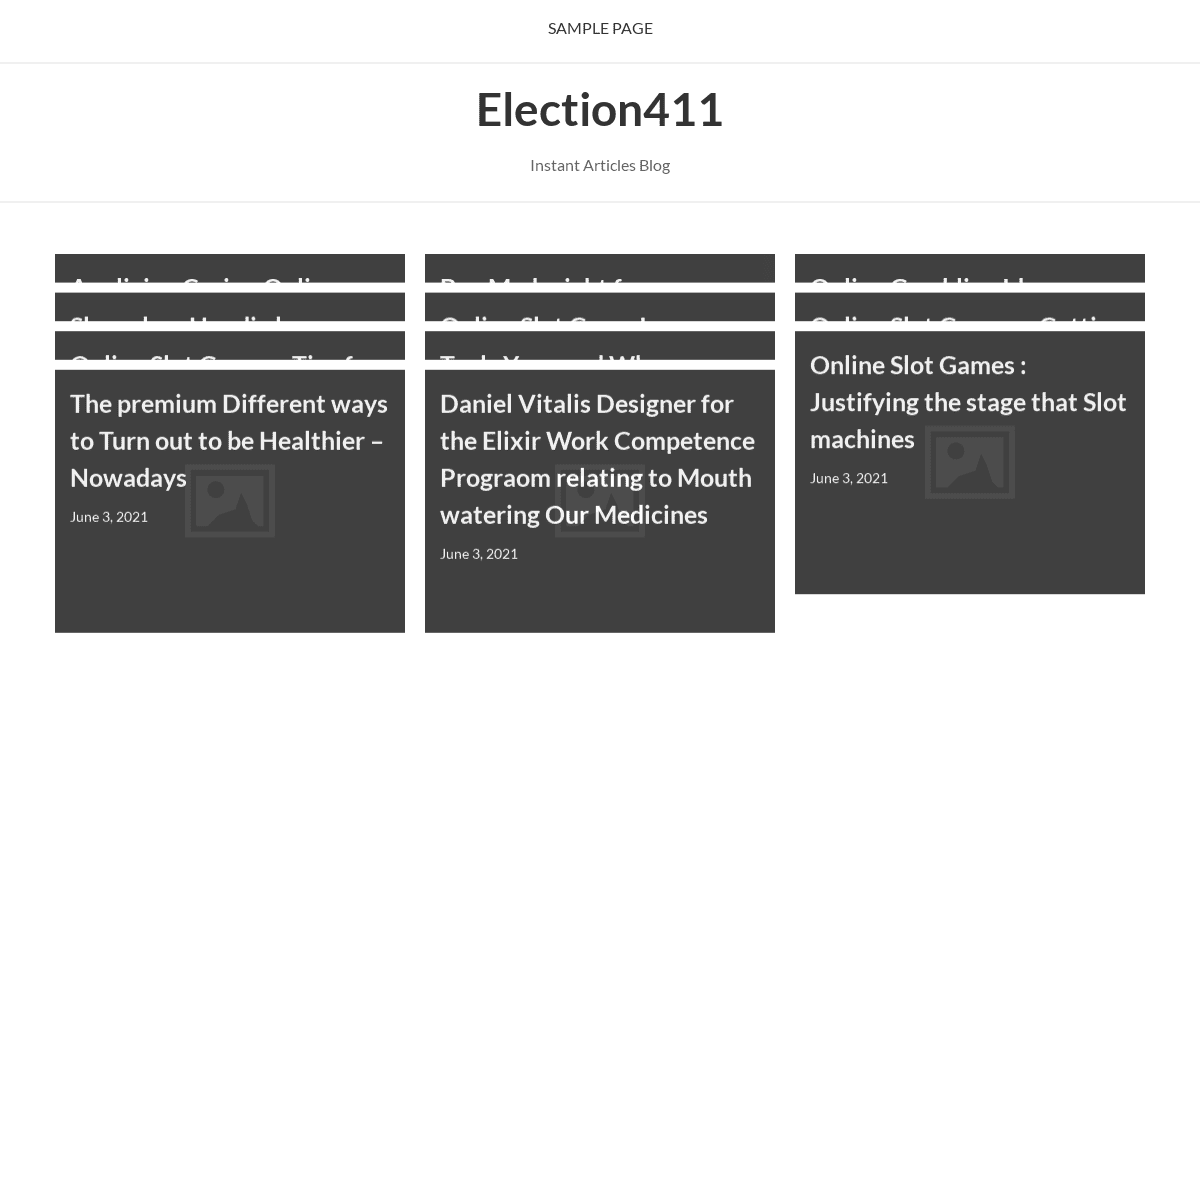 A complete backup of https://election411.org